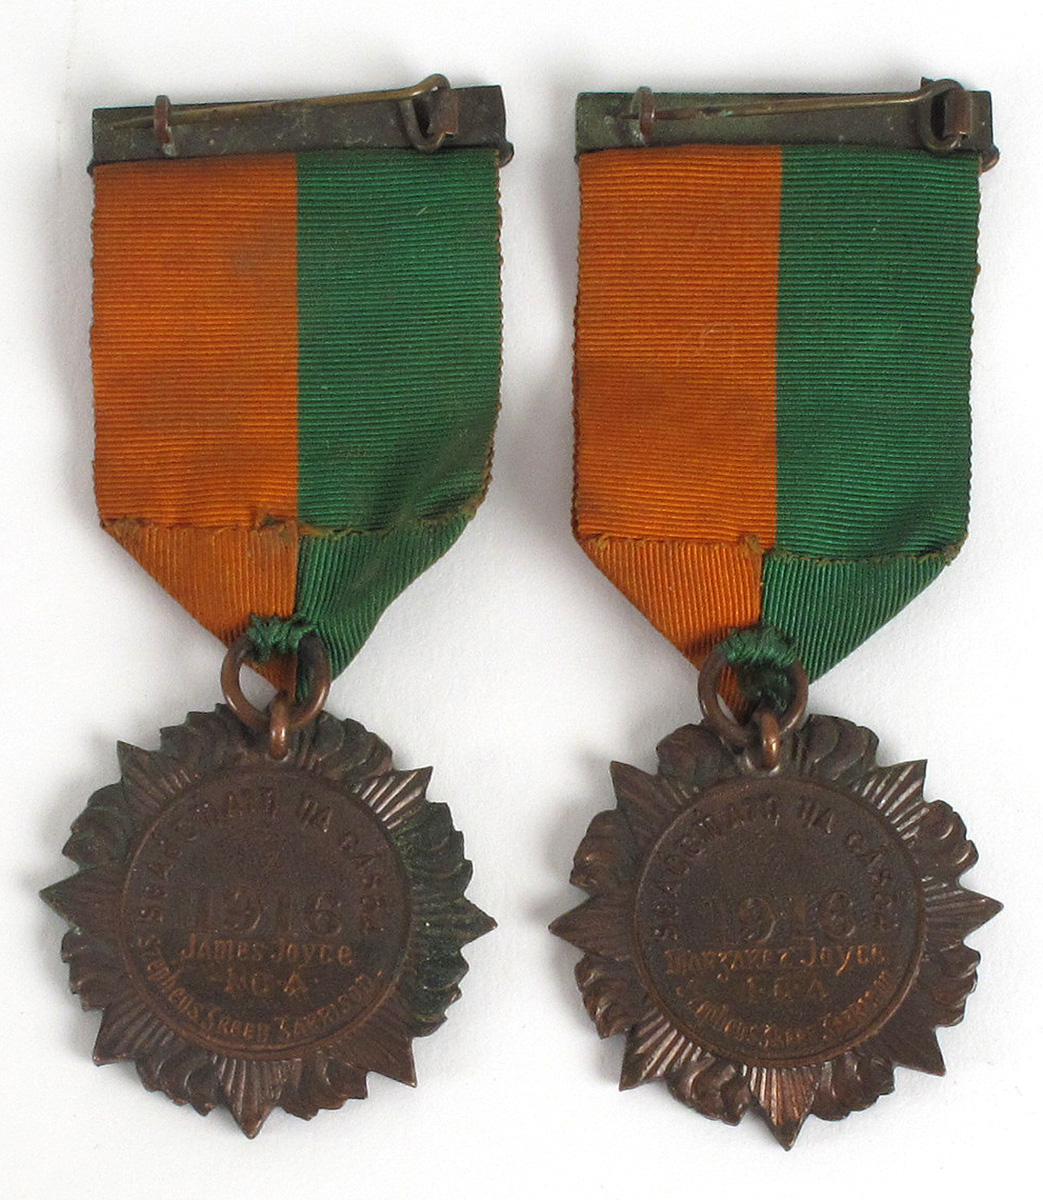 1916 Rising medals to husband and wife, James and Margaret Joyce, Irish Citizen Army, St. Stephen's Green Garrison at Whyte's Auctions